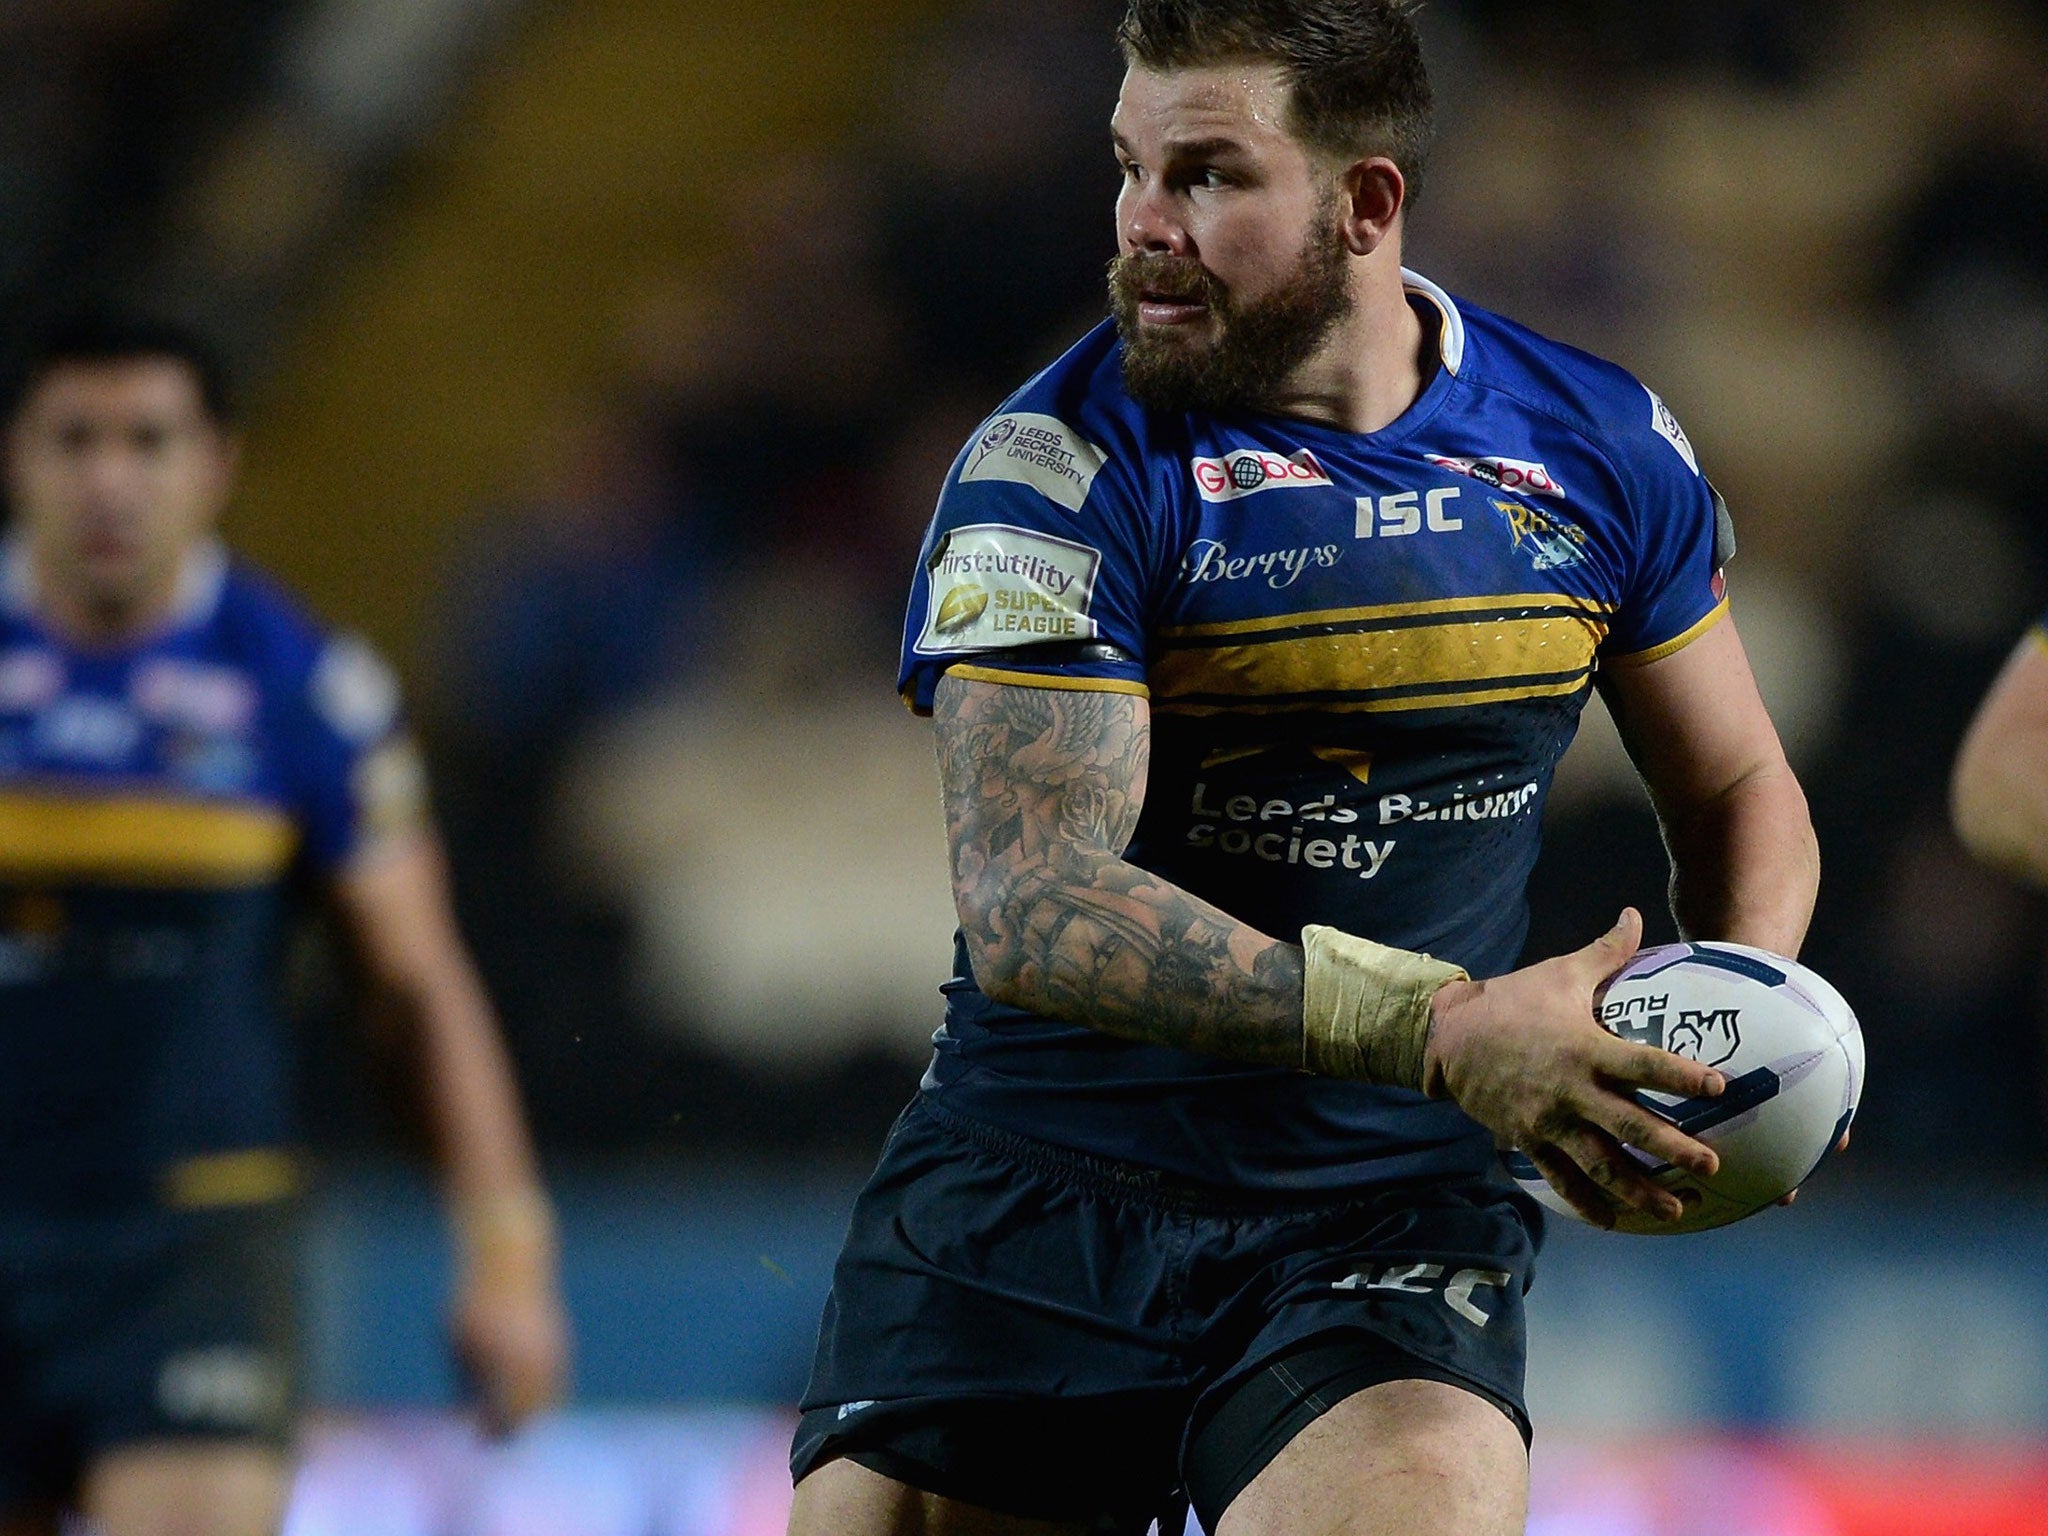 powered Leeds to victory over Wigan at a packed Headingley